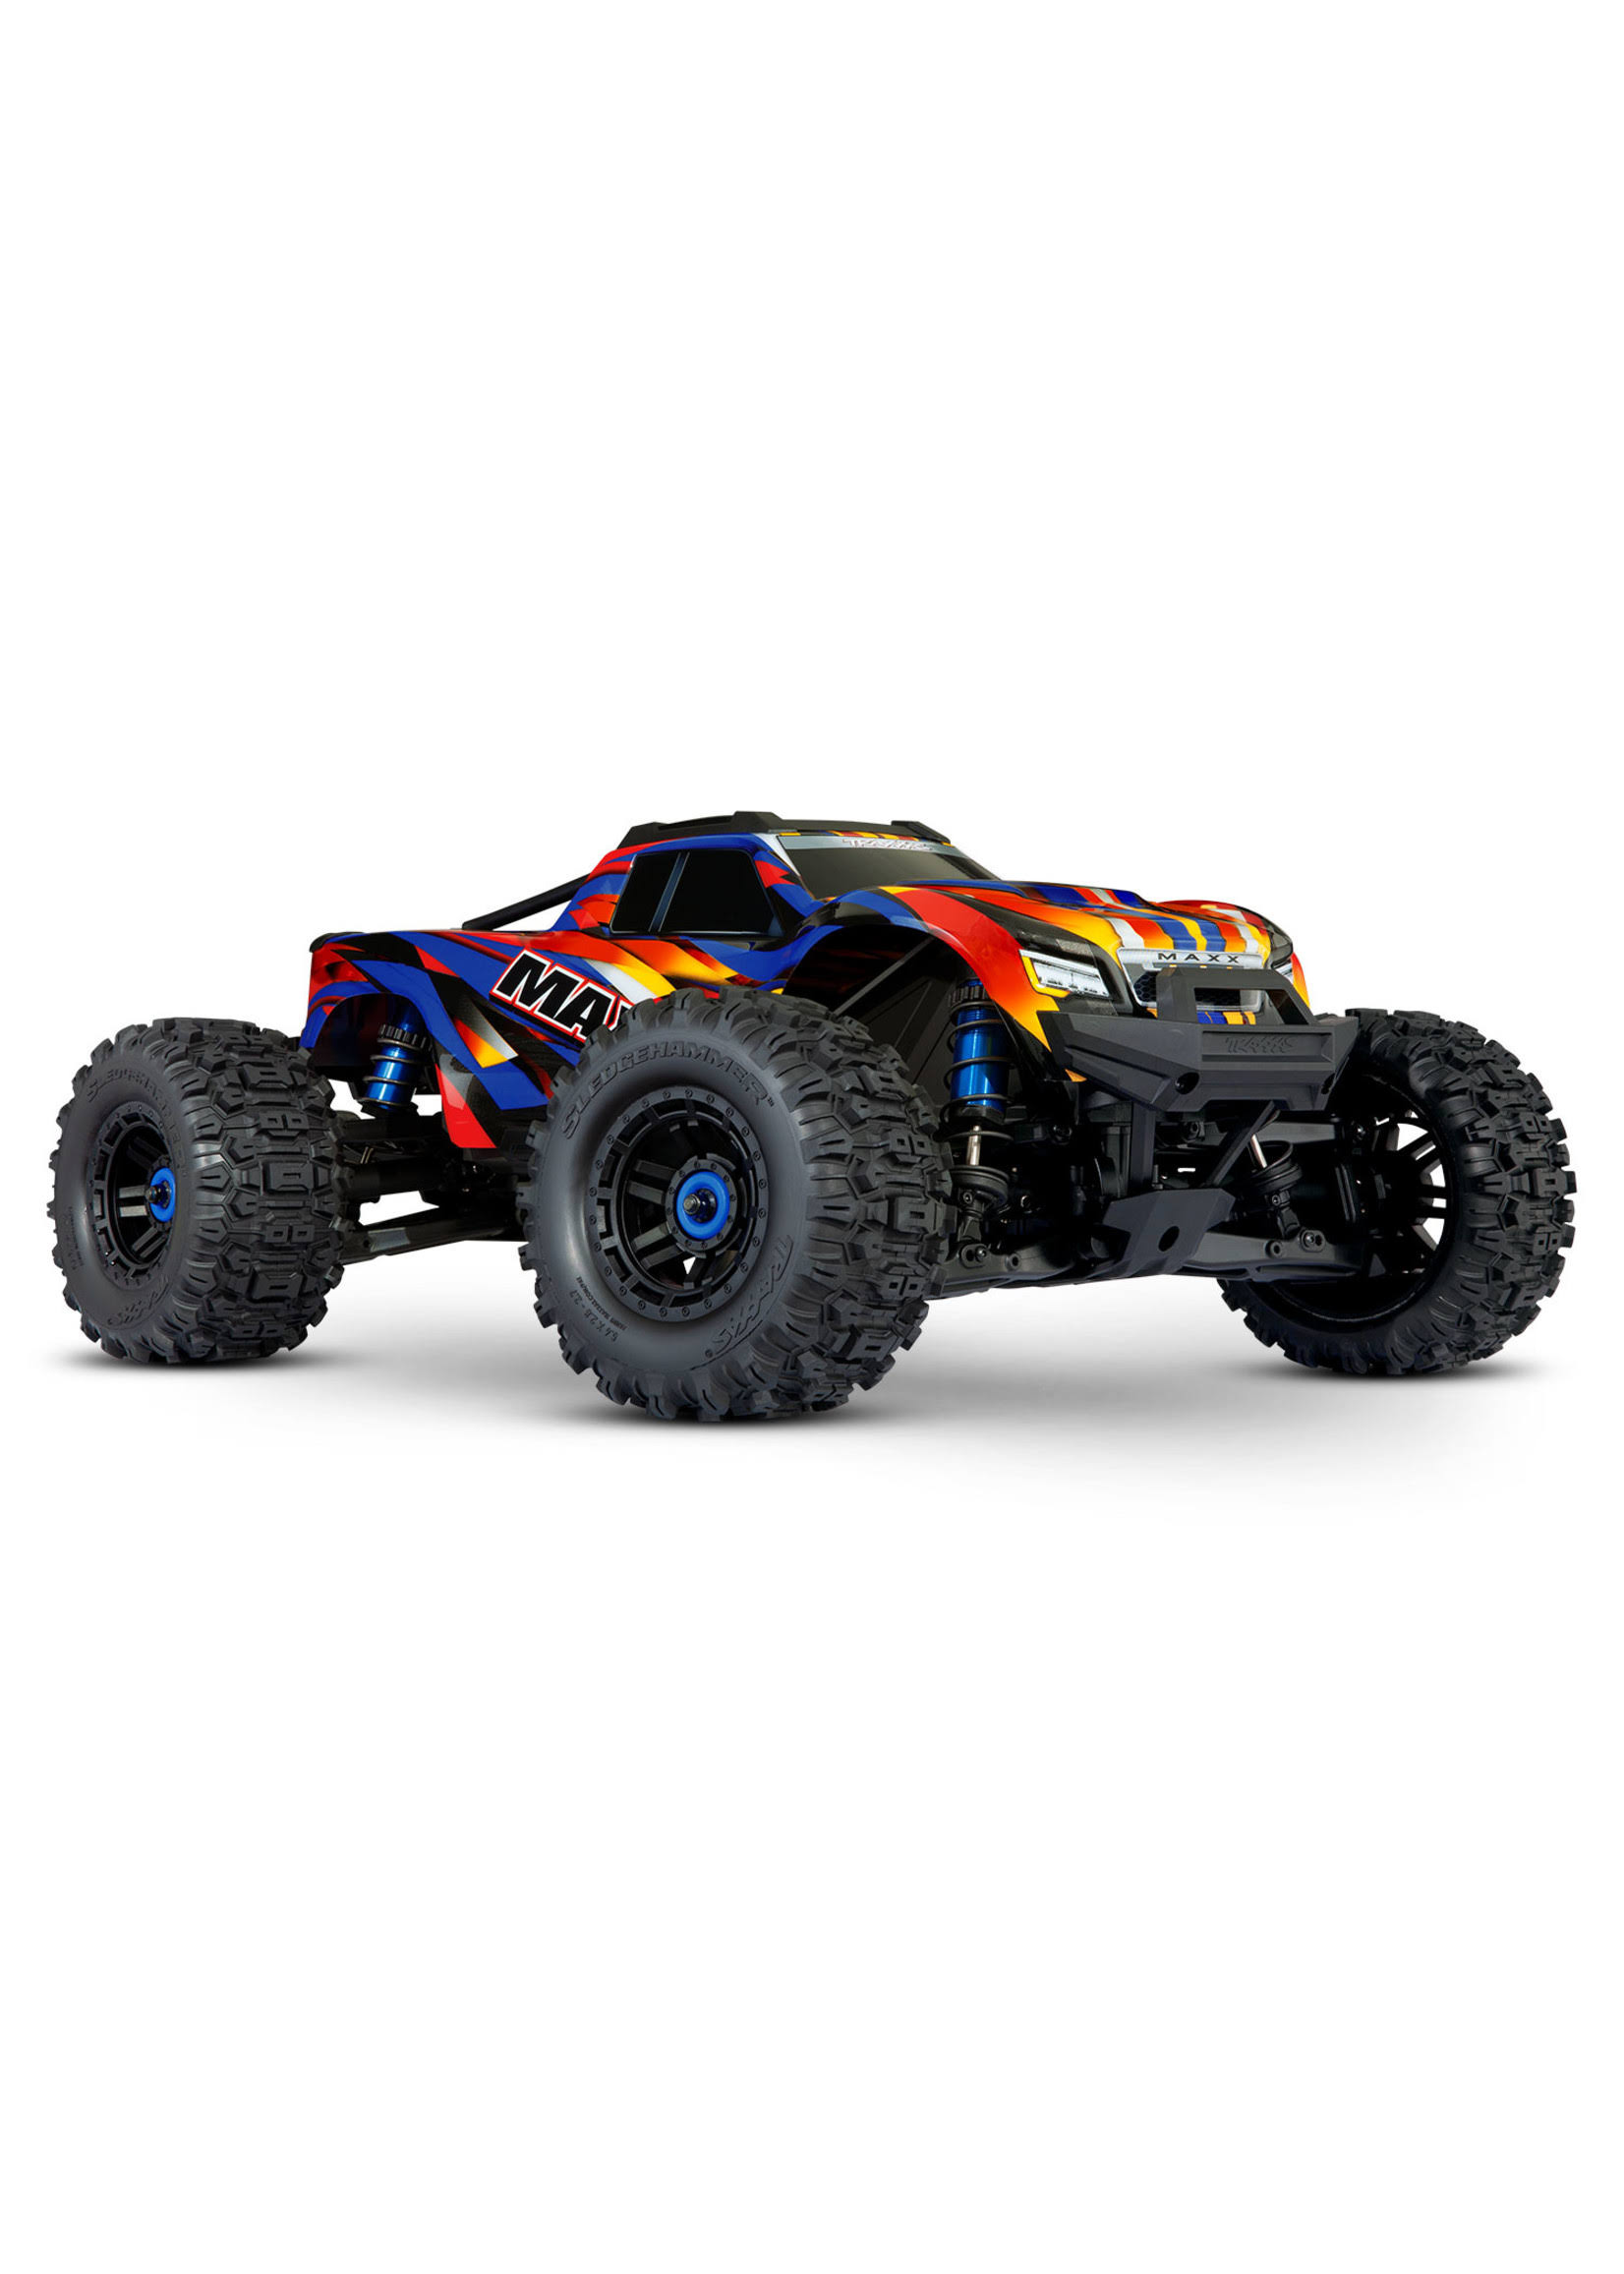 Traxxas 89086-4 Wide-Maxx 4x4 Brushless Monster Truck Rtr 1/10 Tqi 2.4GHz